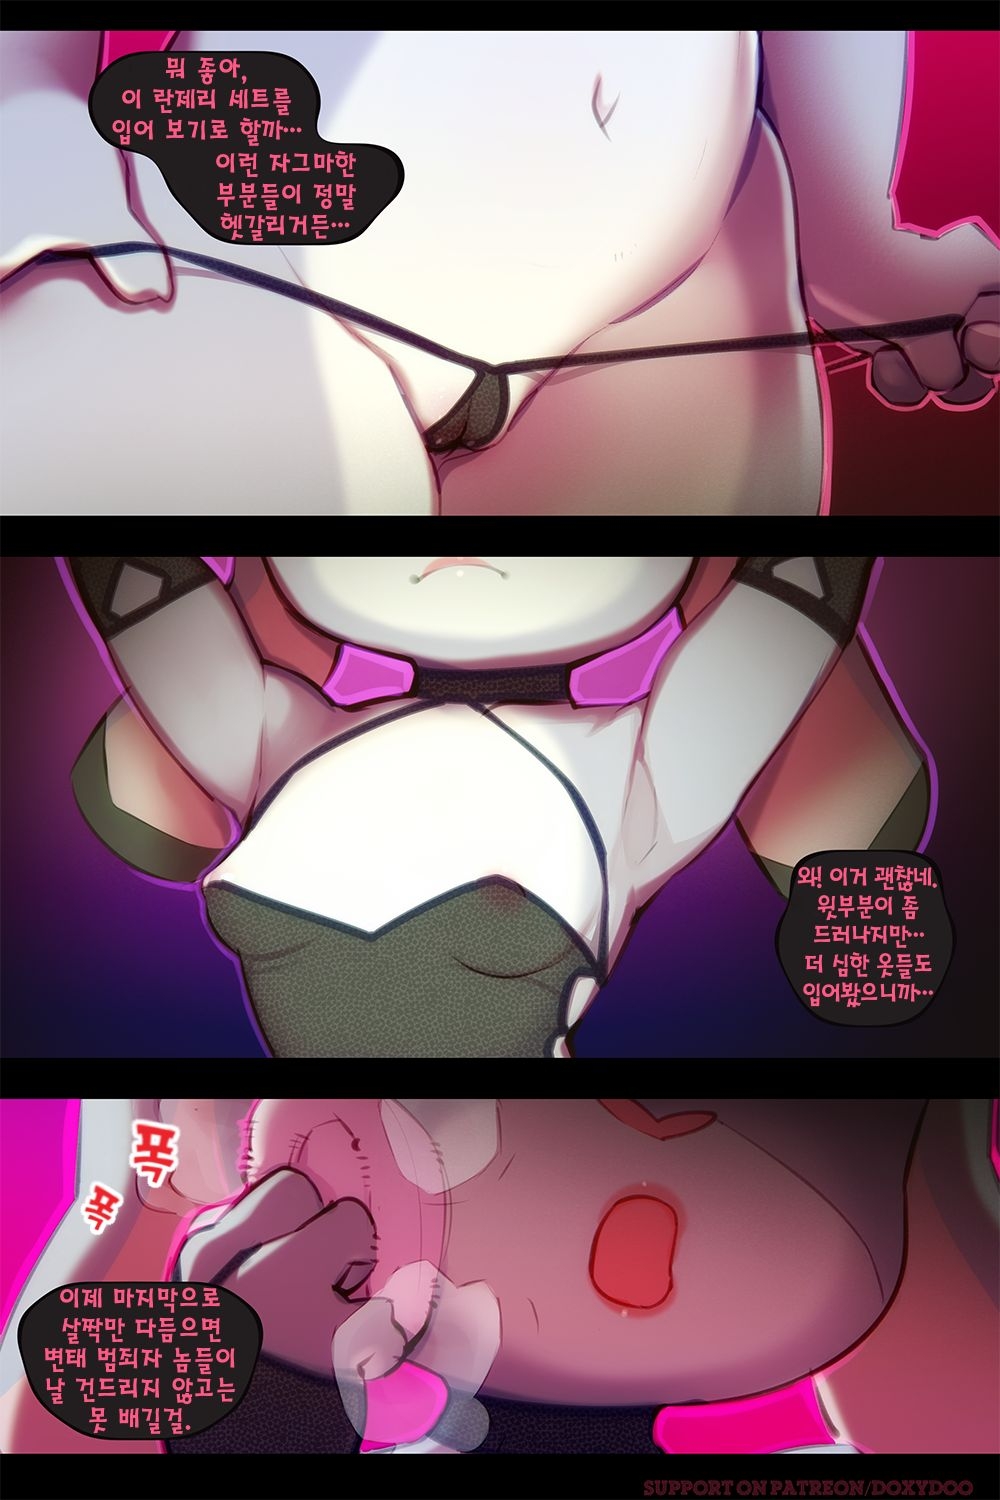 [Doxy] Sweet Sting Part 2: Down The Rabbit Hole | 달콤한 함정수사 2부: 토끼 굴속으로 (Zootopia) [Korean] [Ongoing] 24